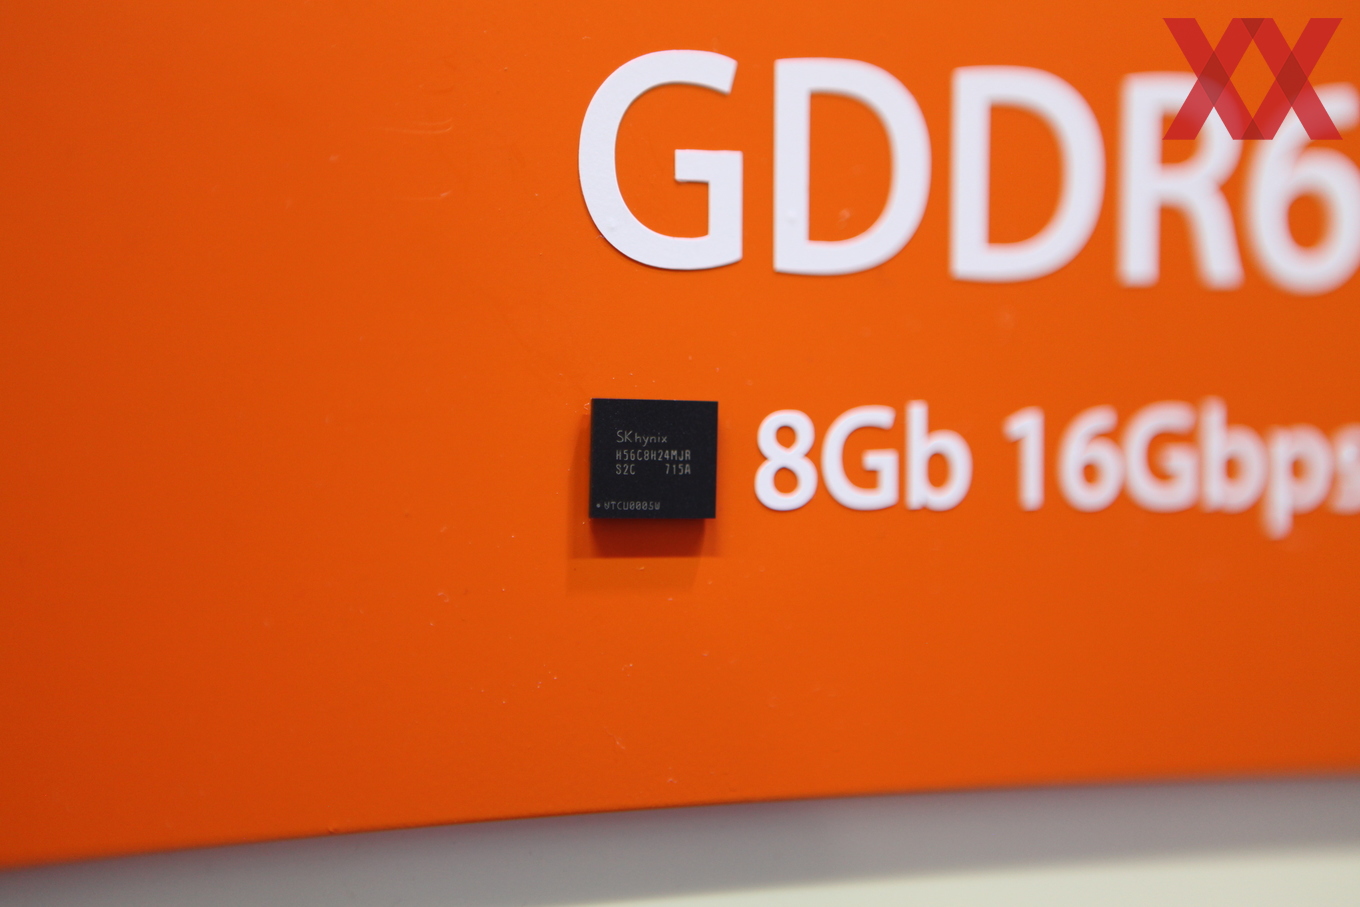 Media asset in full size related to 3dfxzone.it news item entitled as follows: Alla GTC 2017 SK Hynix mostra il primo wafer di memoria video GDDR6 | Image Name: news26306_SK Hynix-GDDR6-GTC-2017_1.jpg